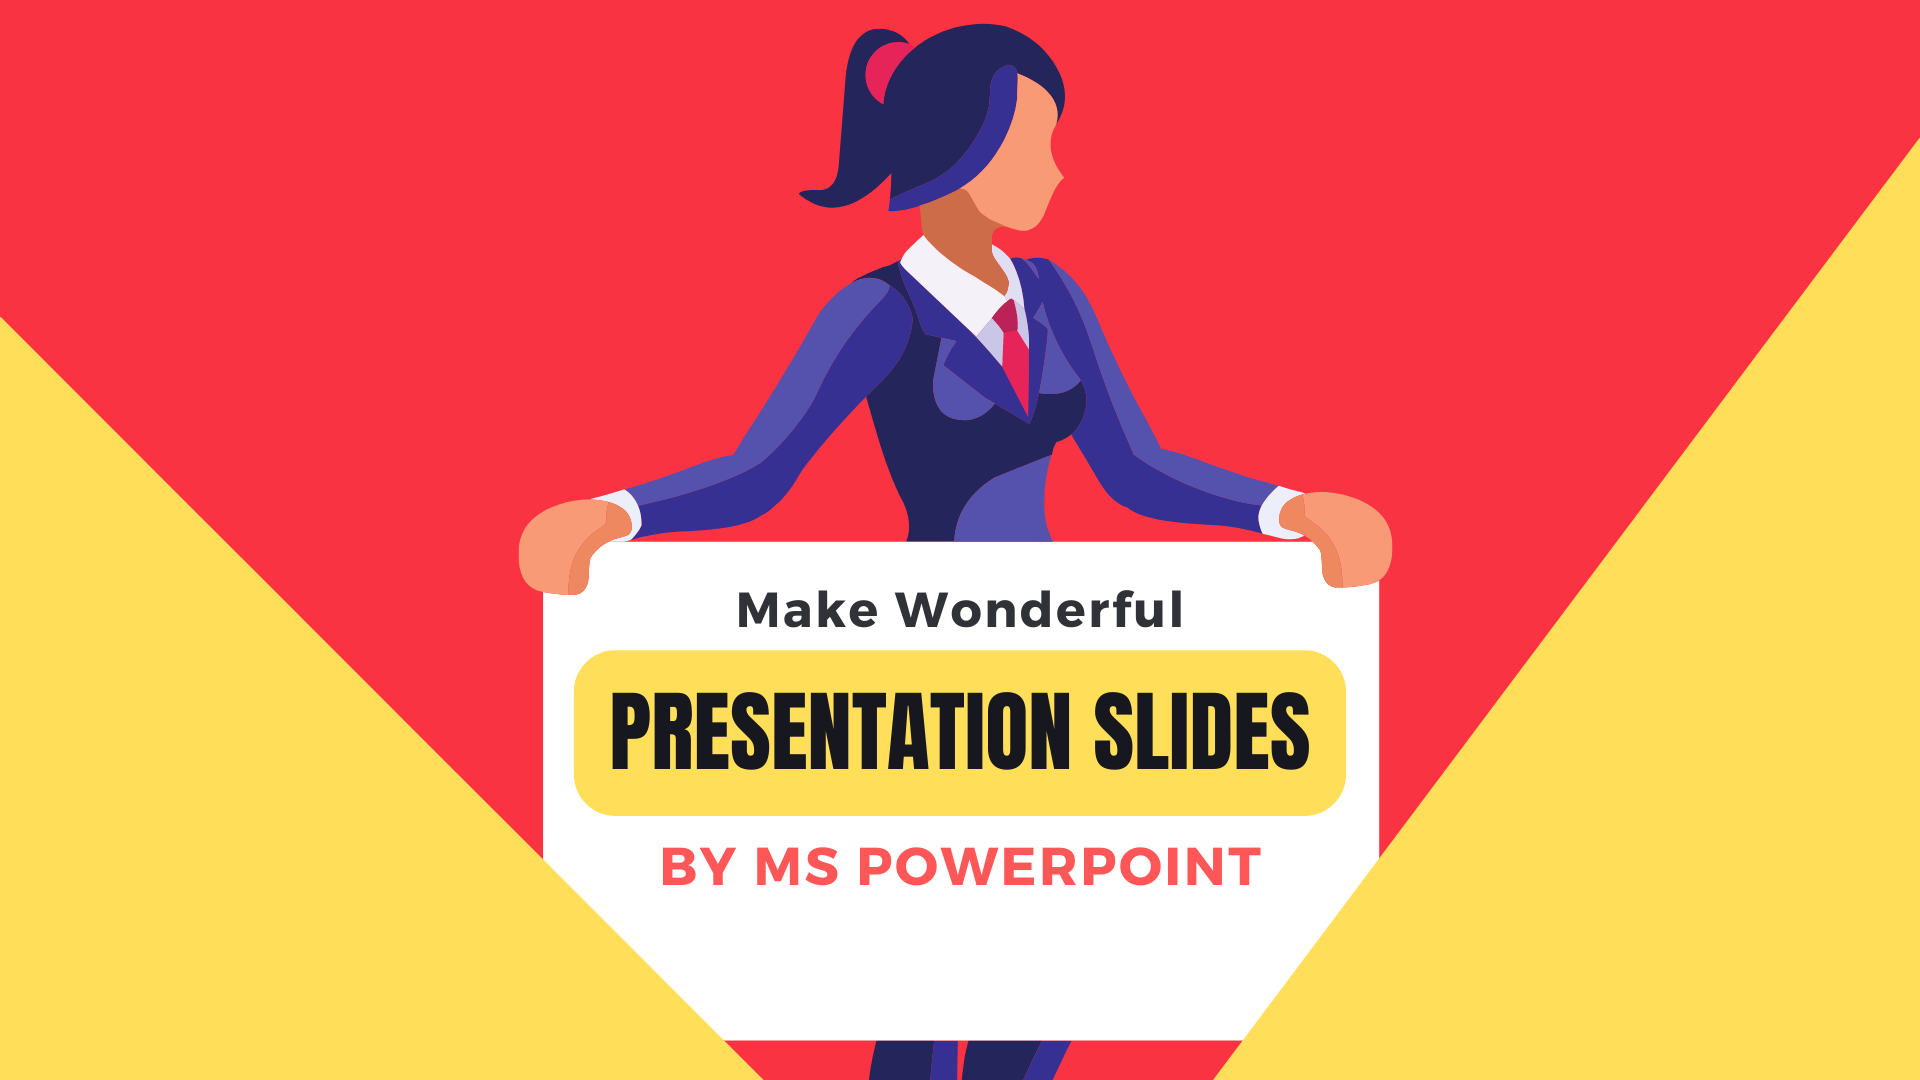 Make Wonderful Presentation Slides by MS PowerPoint Course Image